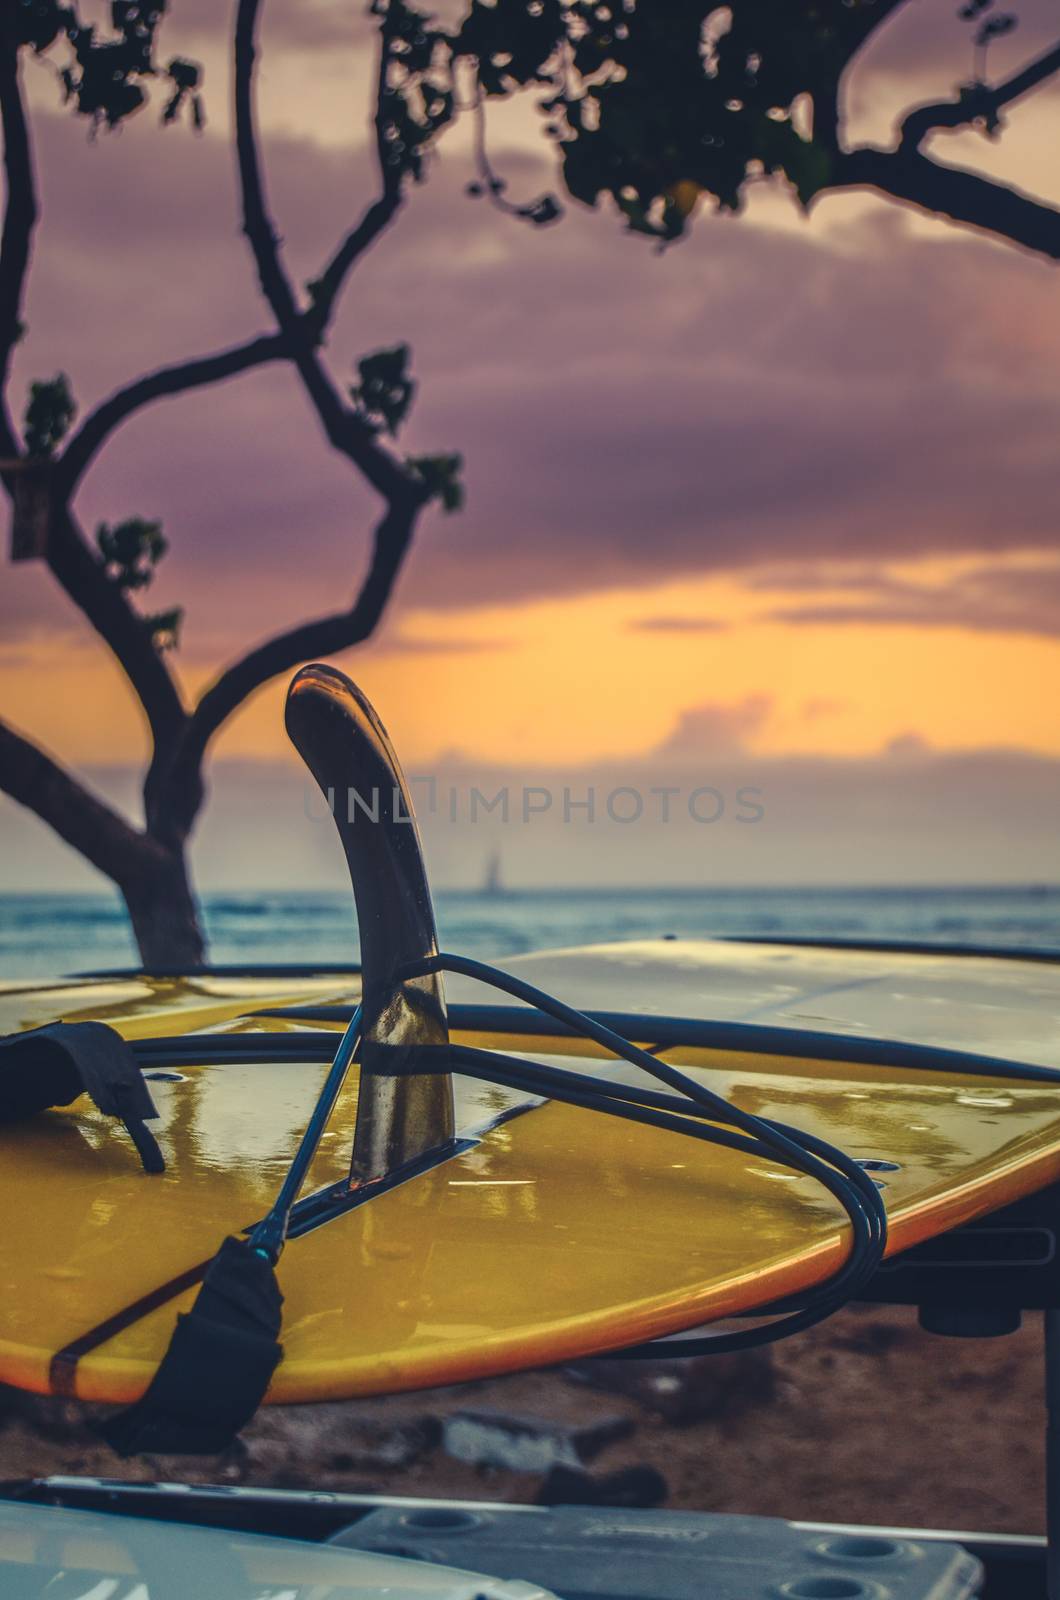 Detail Of A Surfboard On The Back Of A Truck By The bEach At Sunset In Hawaii